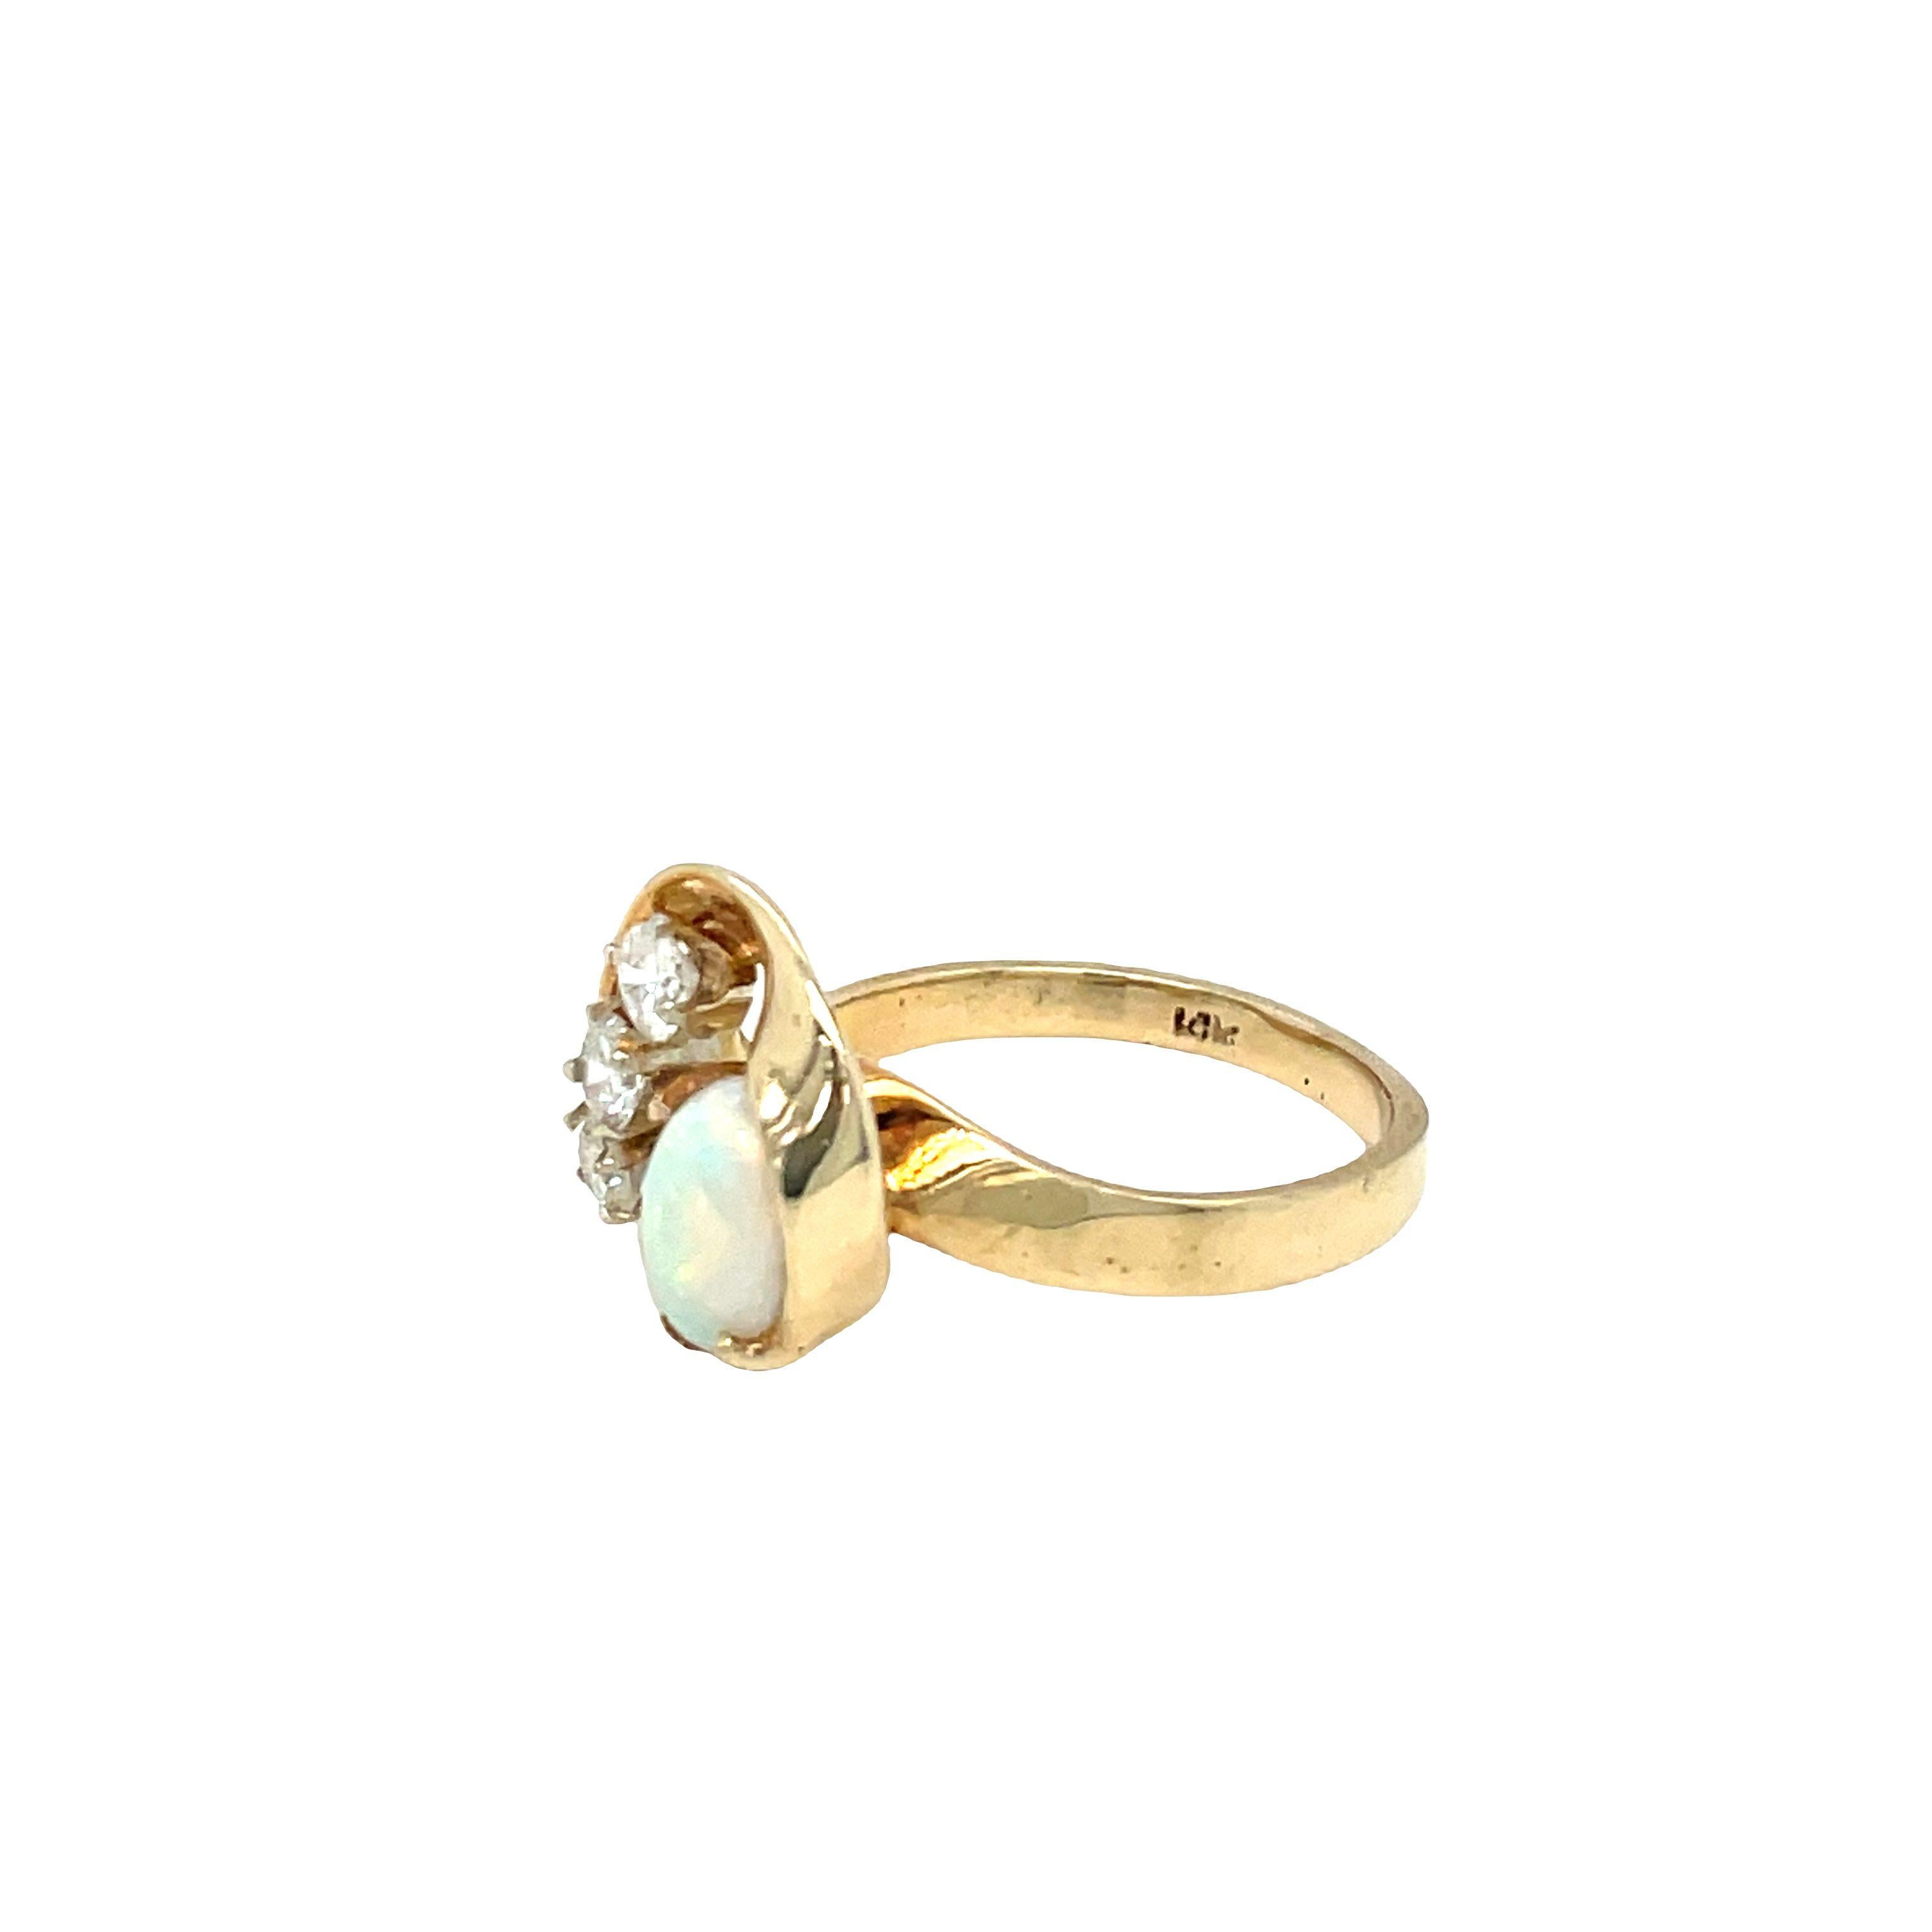 Vintage Oval Opal Diamond Swirl Free form Ring 14k Yellow Gold In Good Condition For Sale In beverly hills, CA